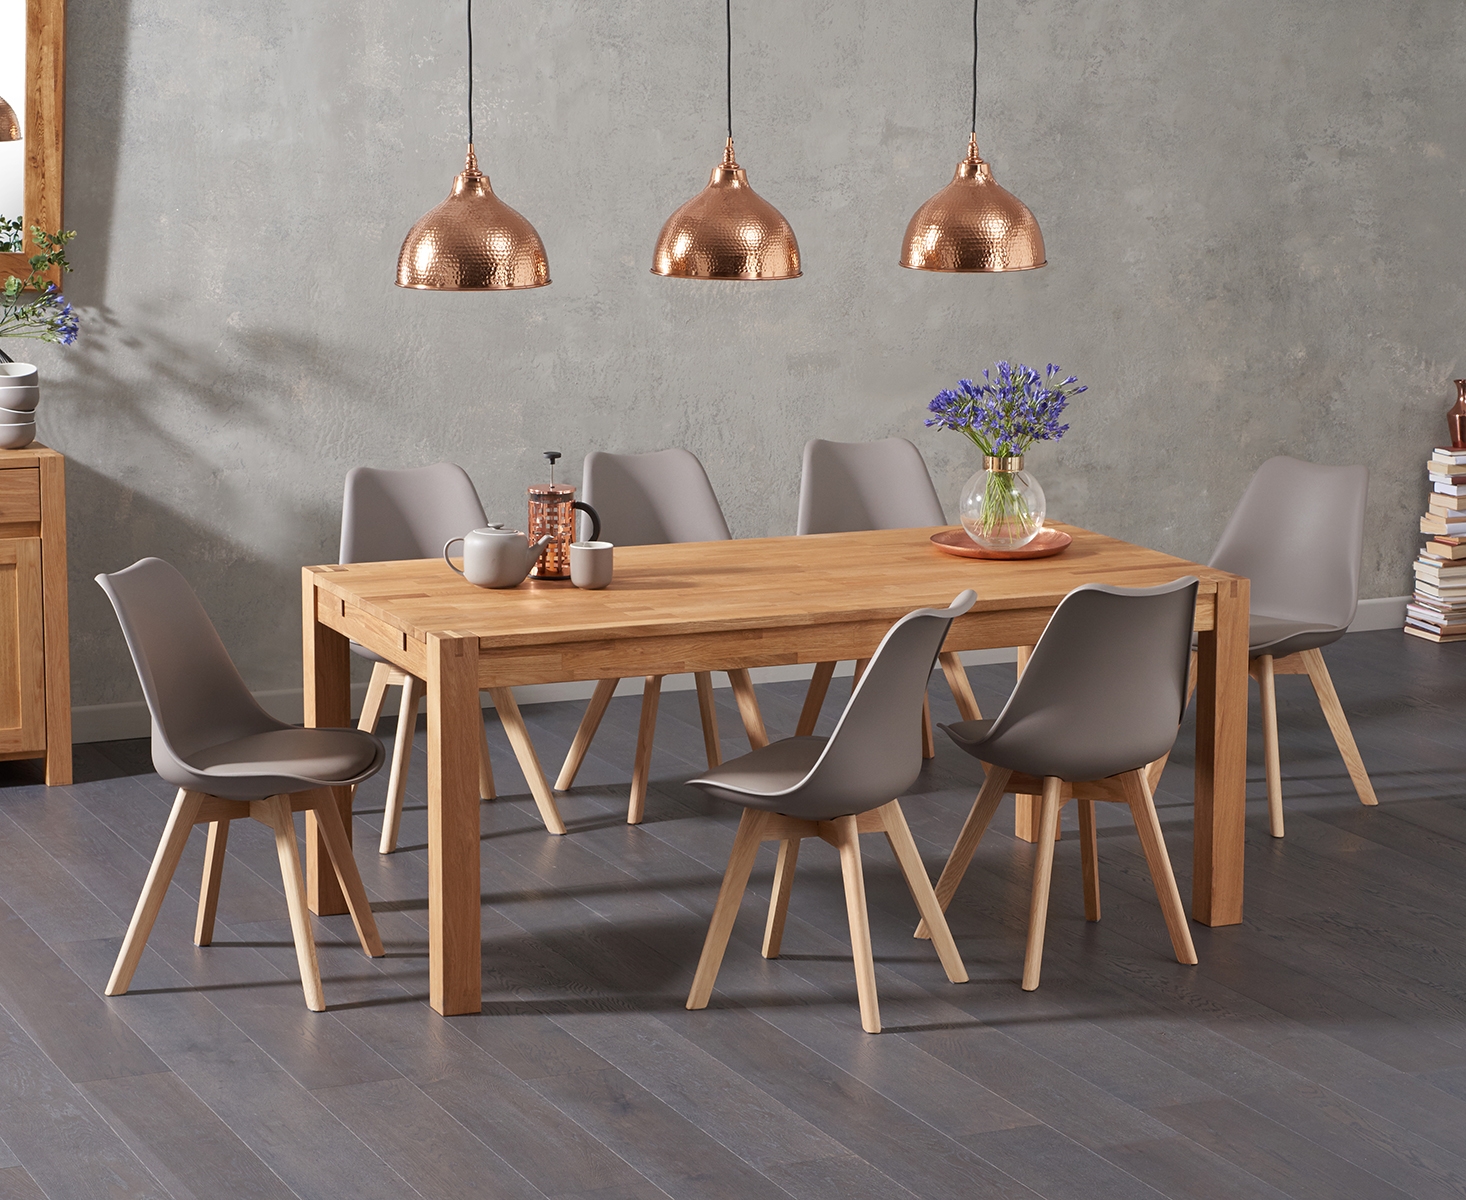 Verona 180cm Solid Oak Dining Table With 6 Dark Grey Orson Faux Leather Chairs